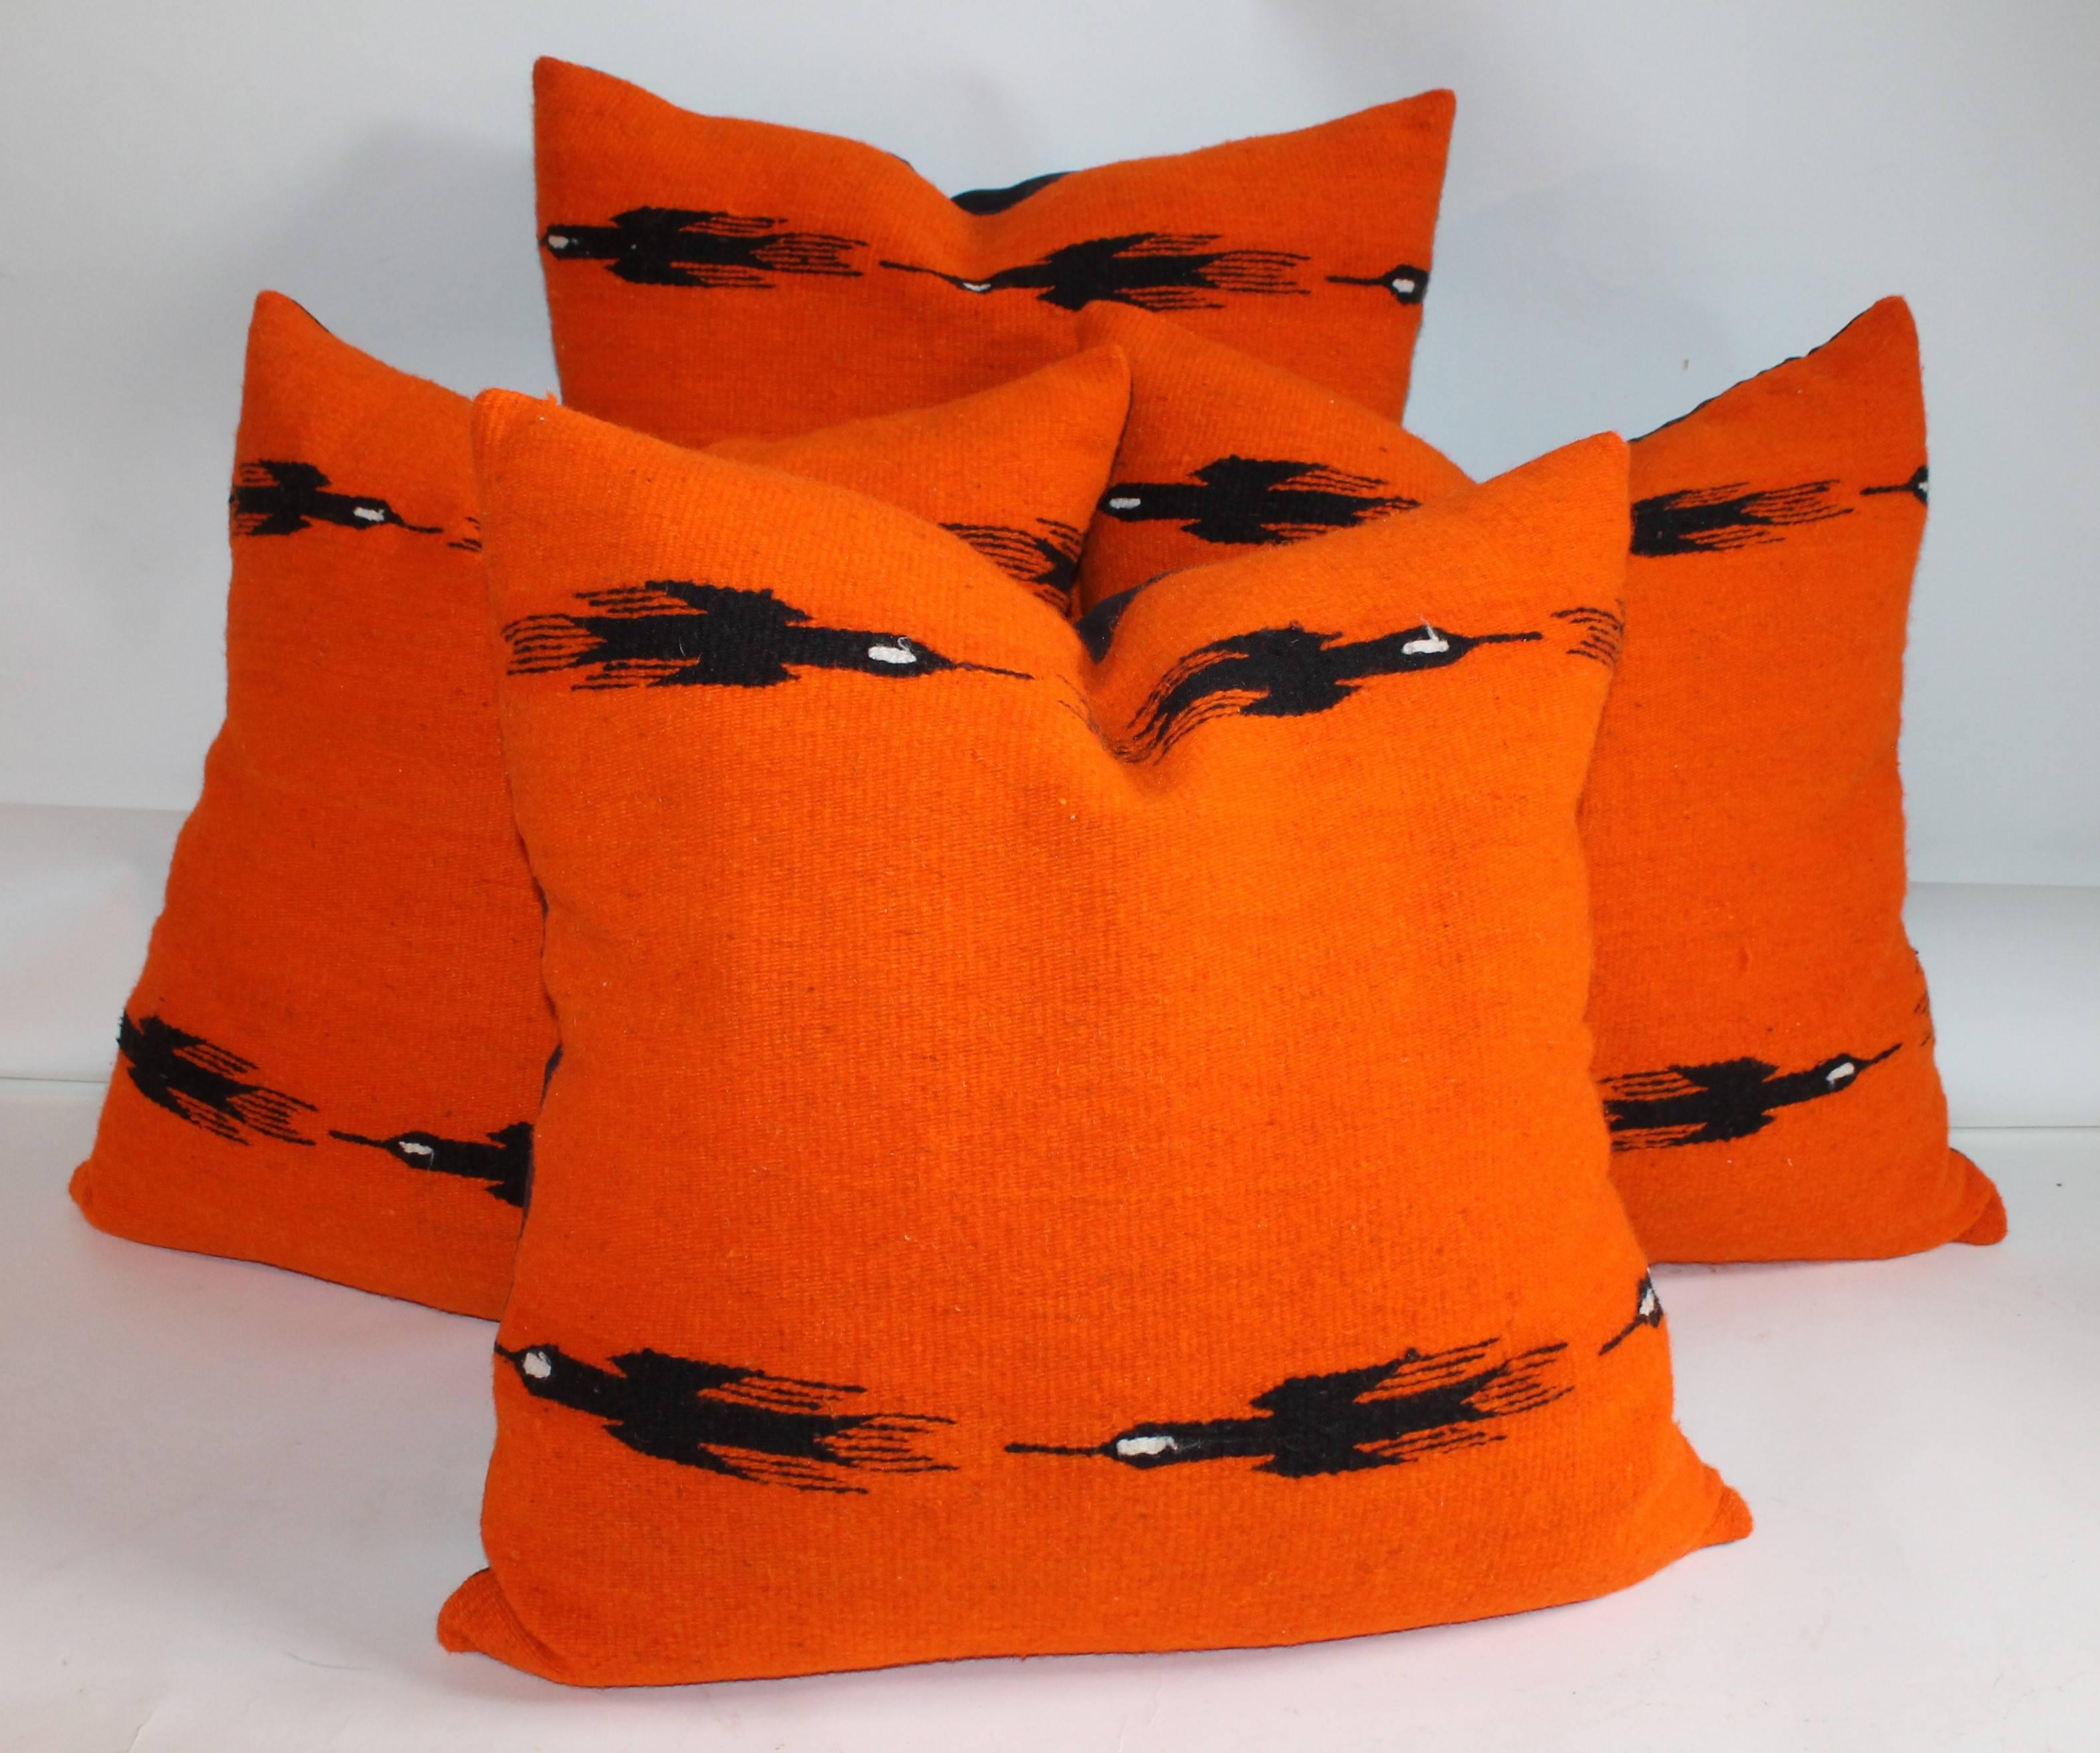 These black birds in flight with a orange back round color are in fine condition and are sold as a group of four pillows. The backing of course is in black cotton linen.